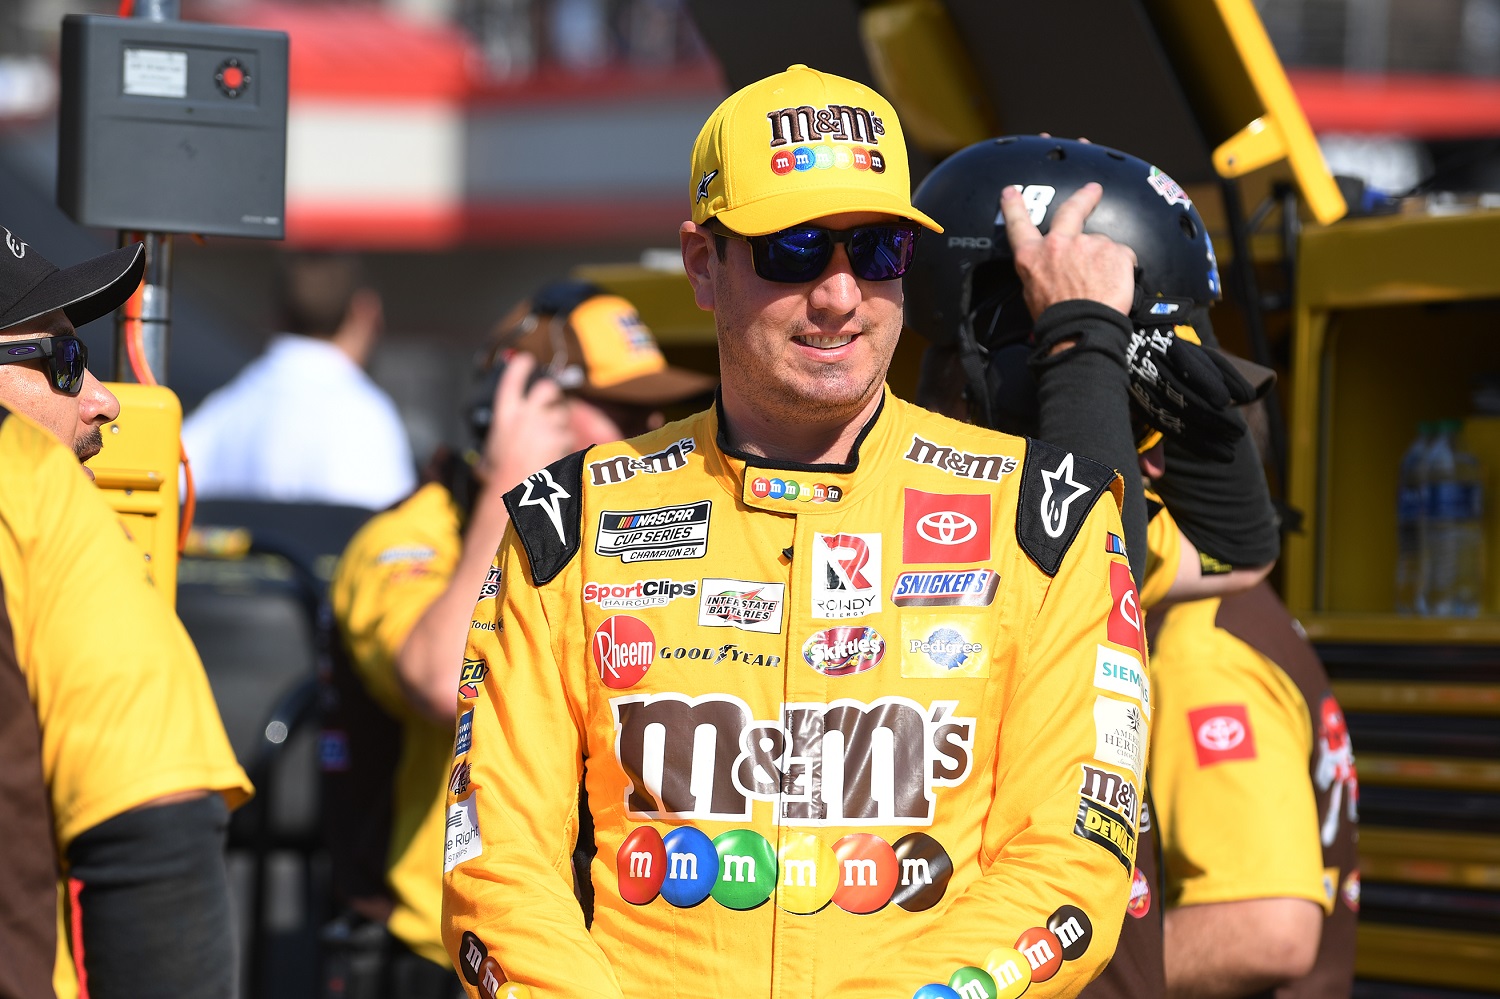 NASCAR Penalty Reports Help Explain Why Joey Logano and Kyle Busch Finished Where They Did